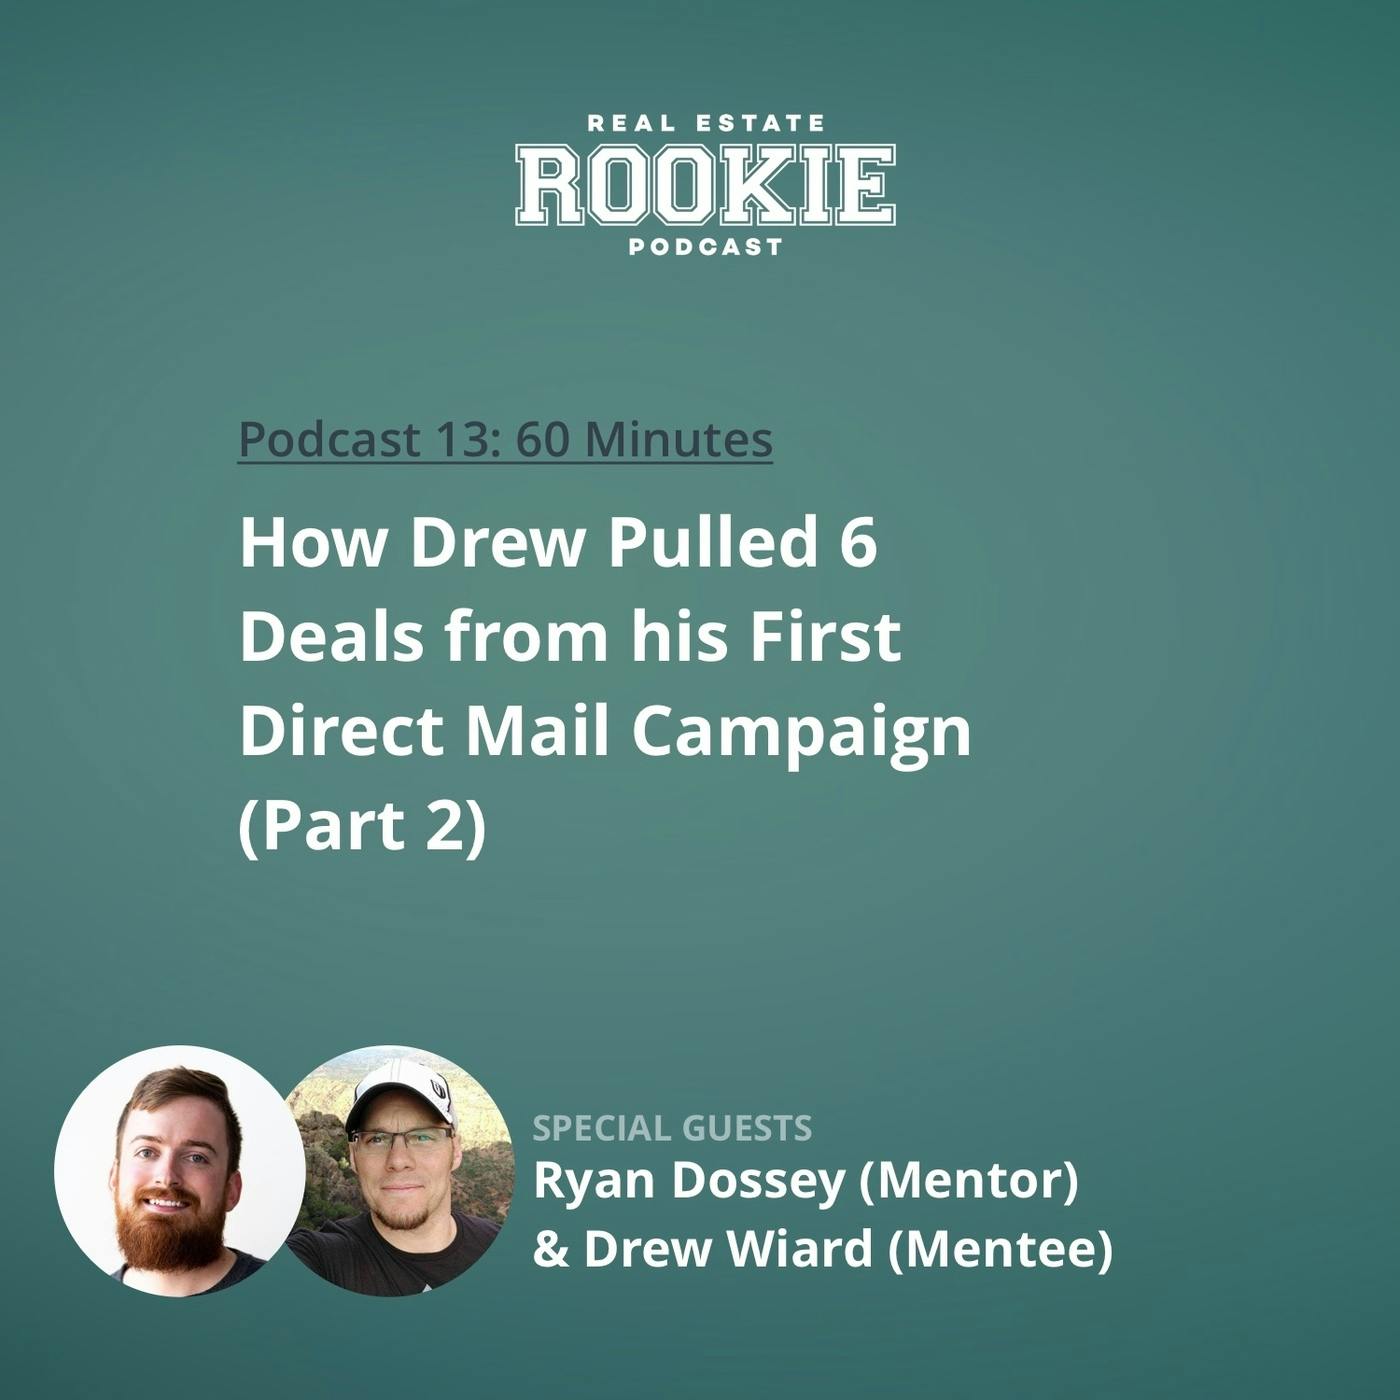 13: How Drew Pulled 6 Deals From His First Direct Mail Campaign With Ryan Dossey (Mentor) and Drew Wiard (Mentee)—Part 2